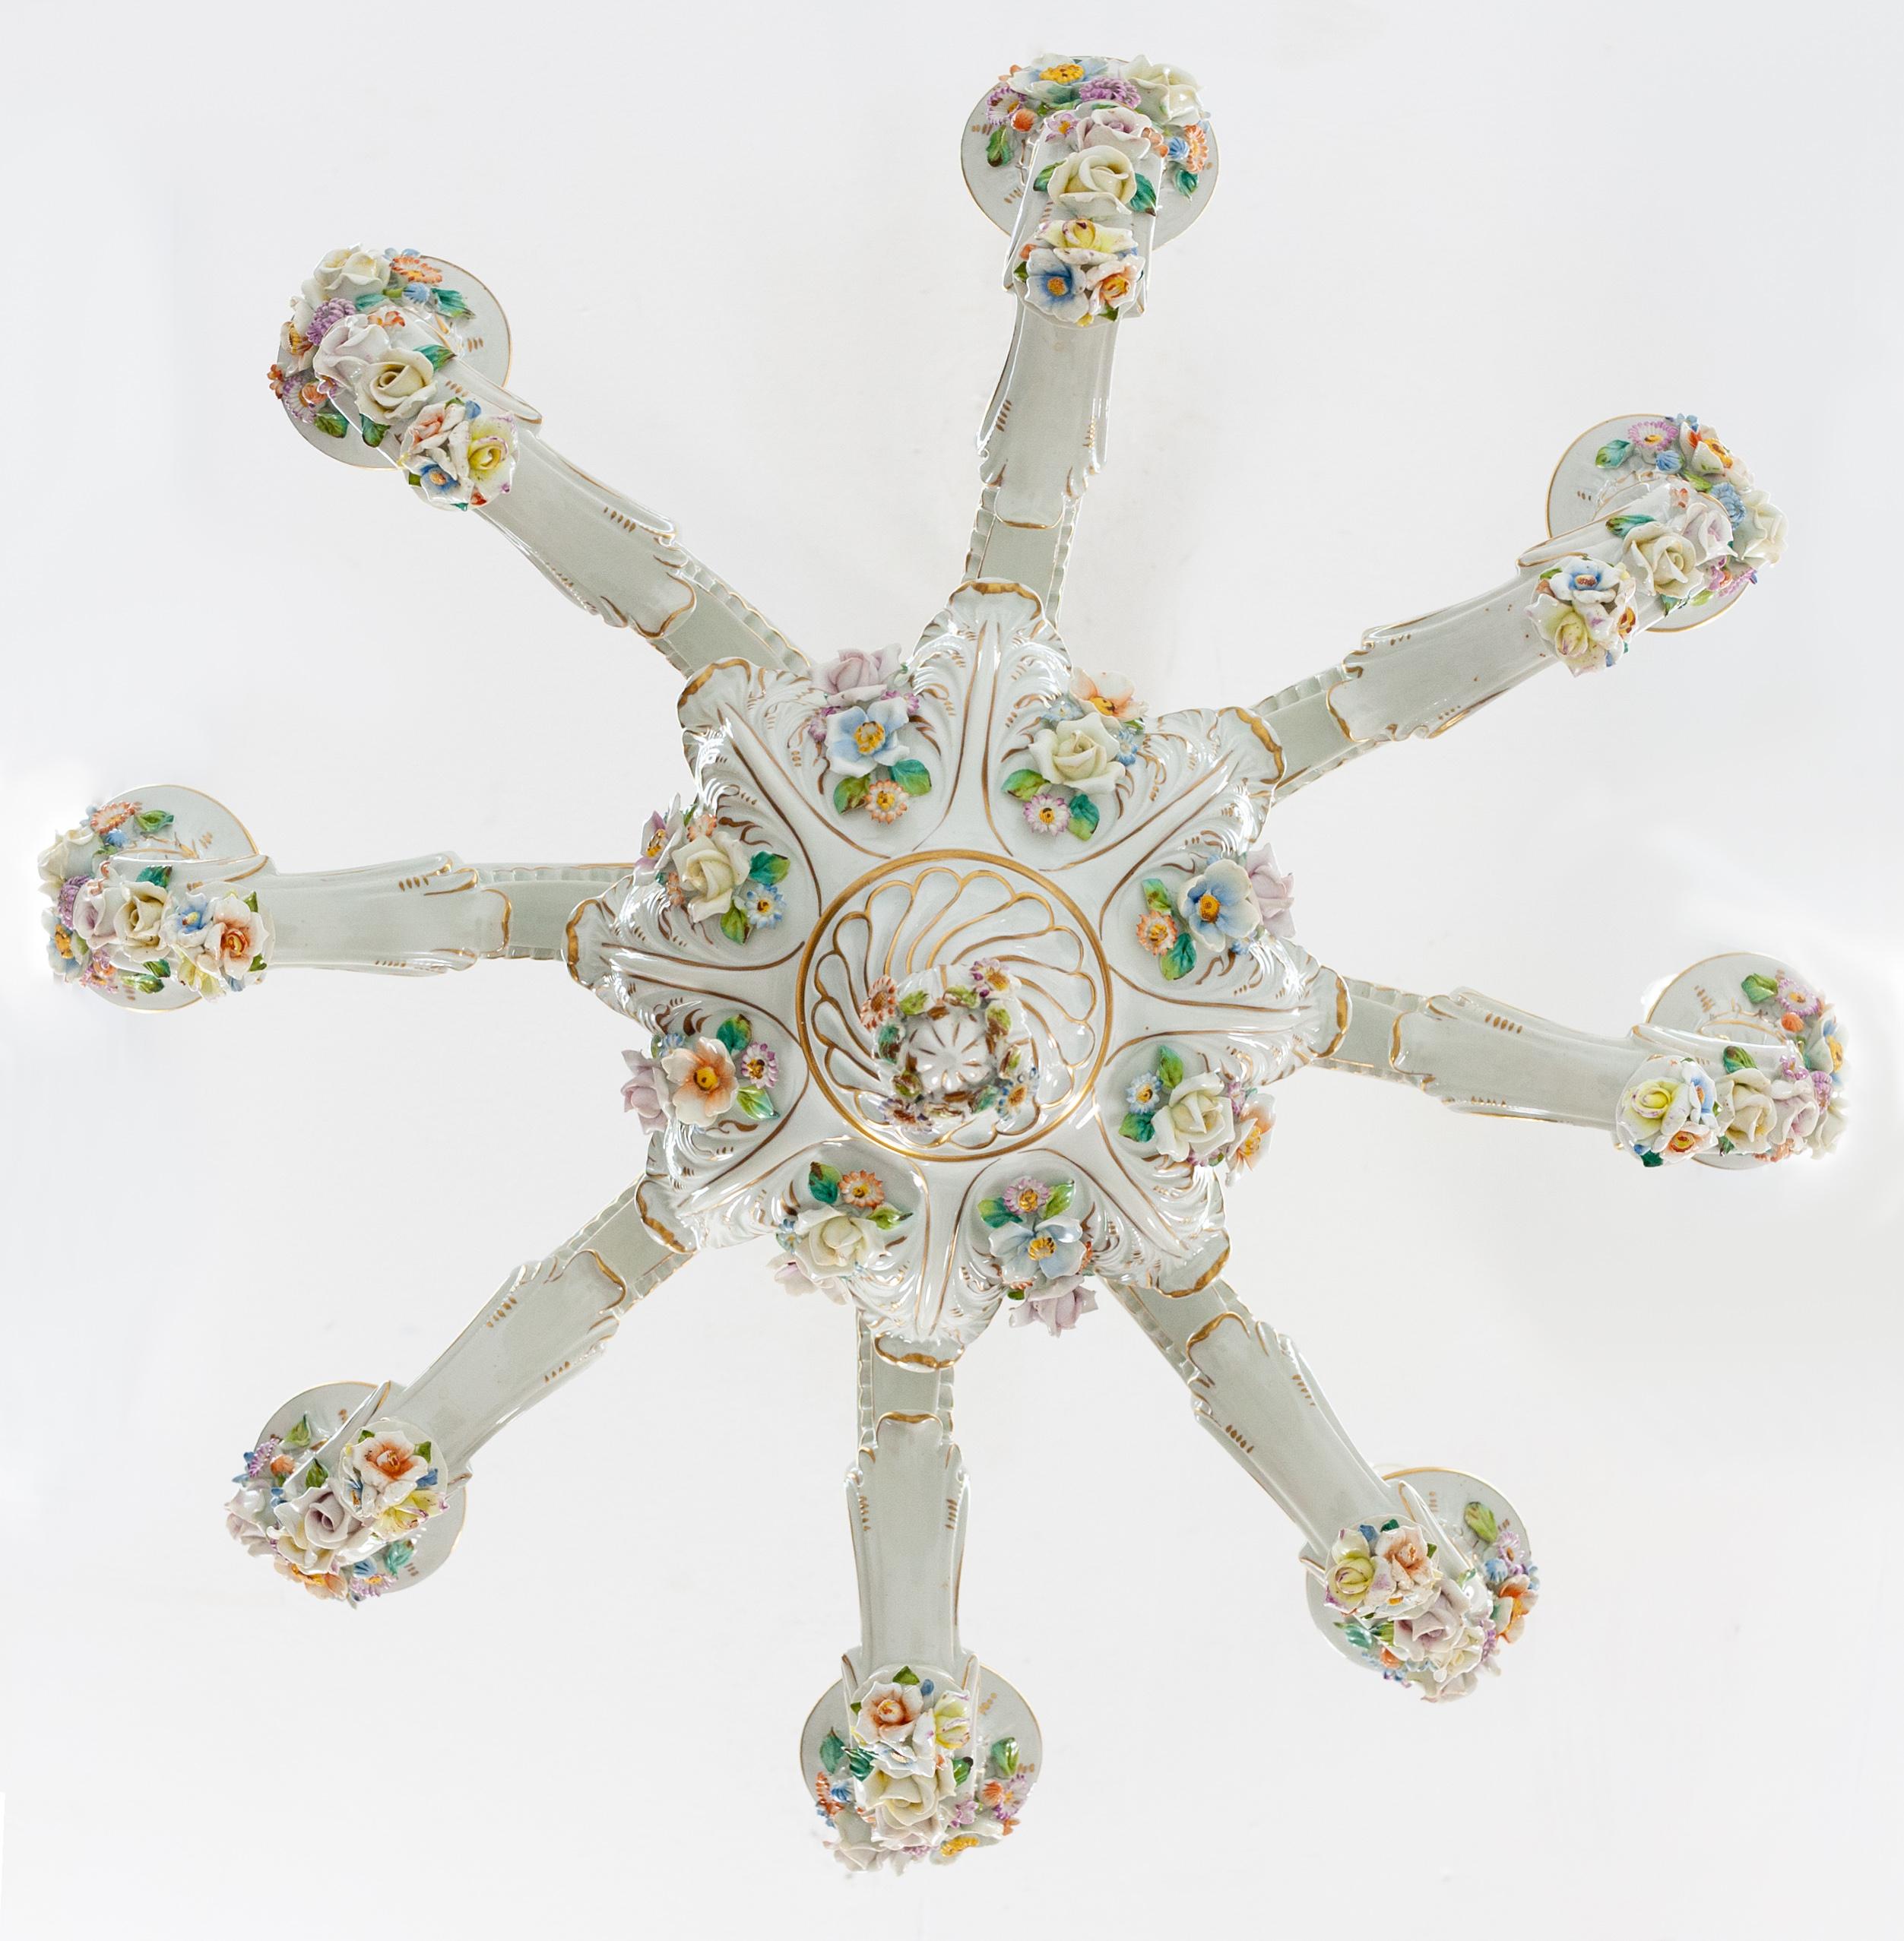 Beautiful Capodimonte raised floral porcelain chandelier. Eight arms. Signed marked with the crown mark S.P.A (SOCIETA’ PORCELLANE ARTISTICHE) Firenze, Italy. 1950s lovely colorful hand painted flowers. Rococo style. Professional rewired.

Overall